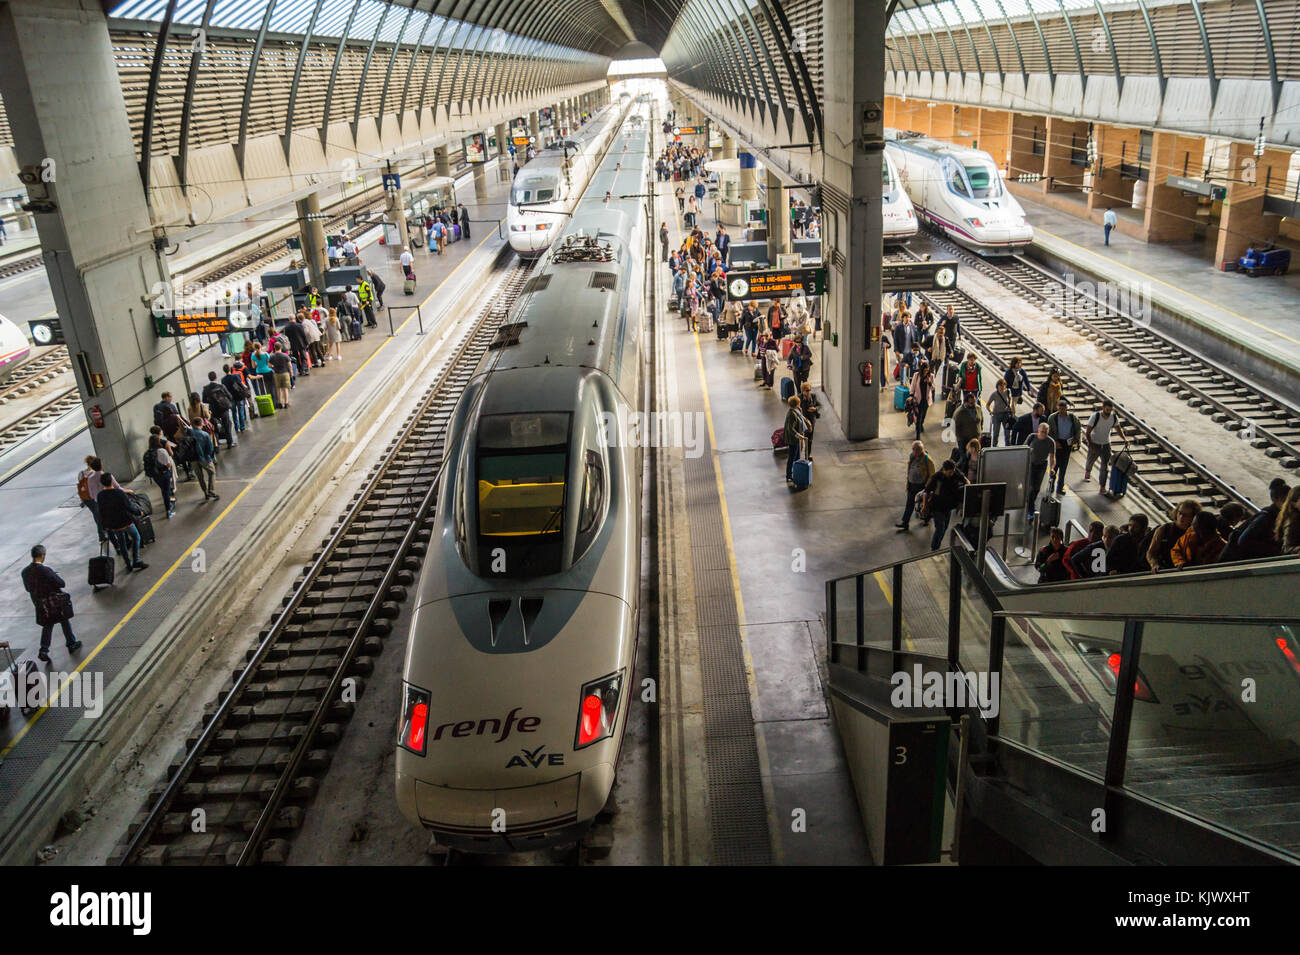 RENFE AVE high-speed trains, Santa Justa station, Seville, Andalucia, Spain Stock Photo